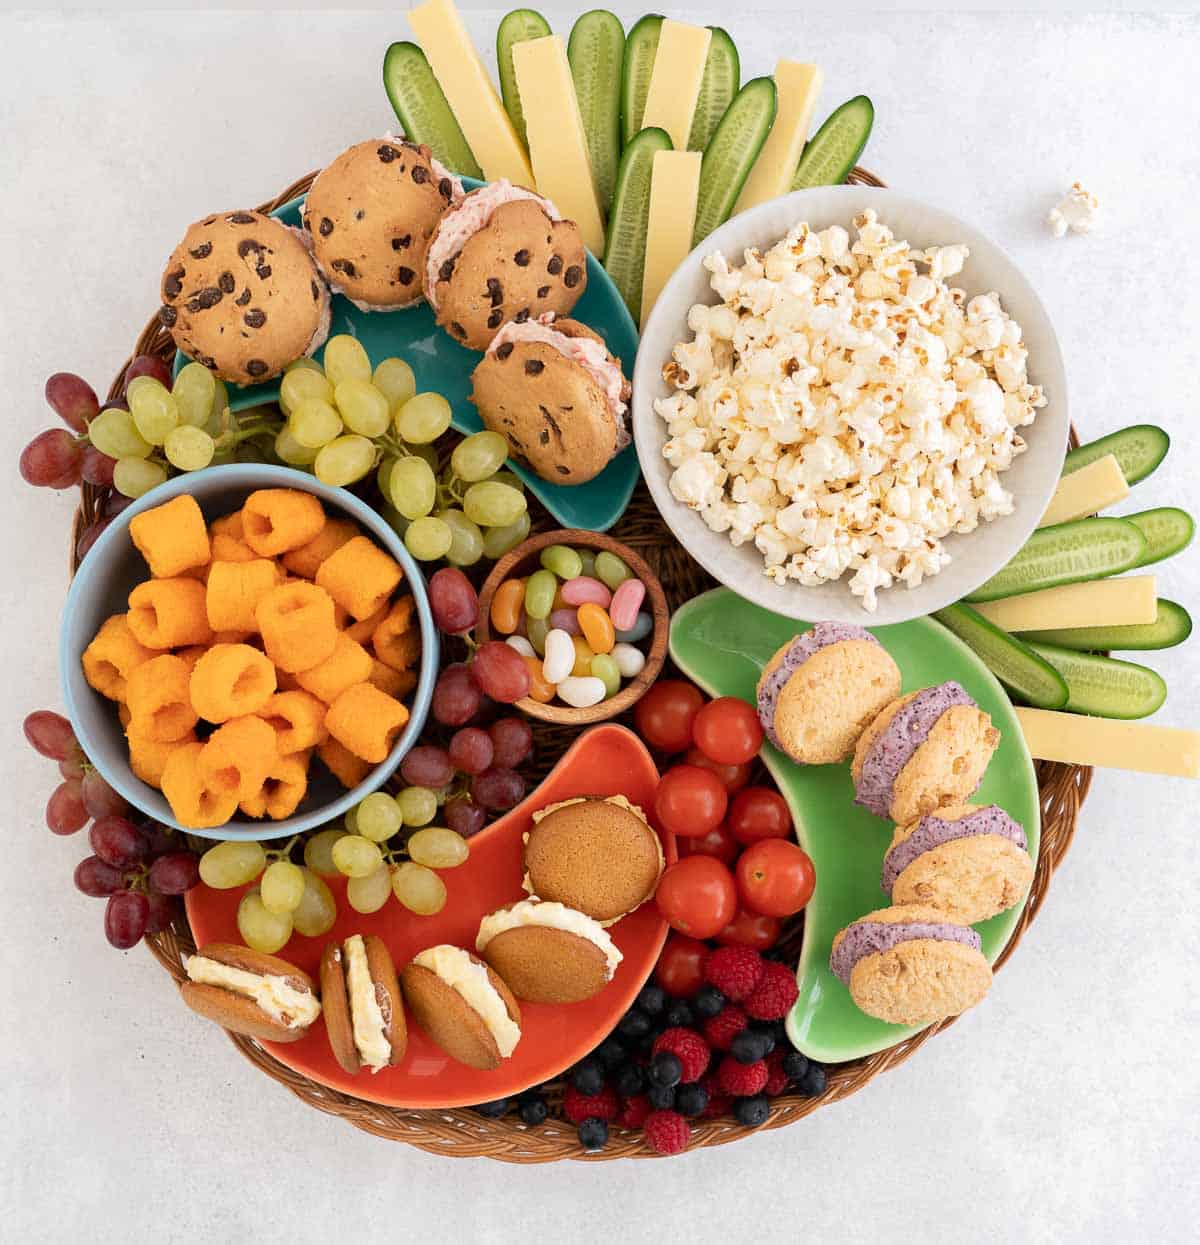 A large circular platter loaded with gluten free products and fresh produce.